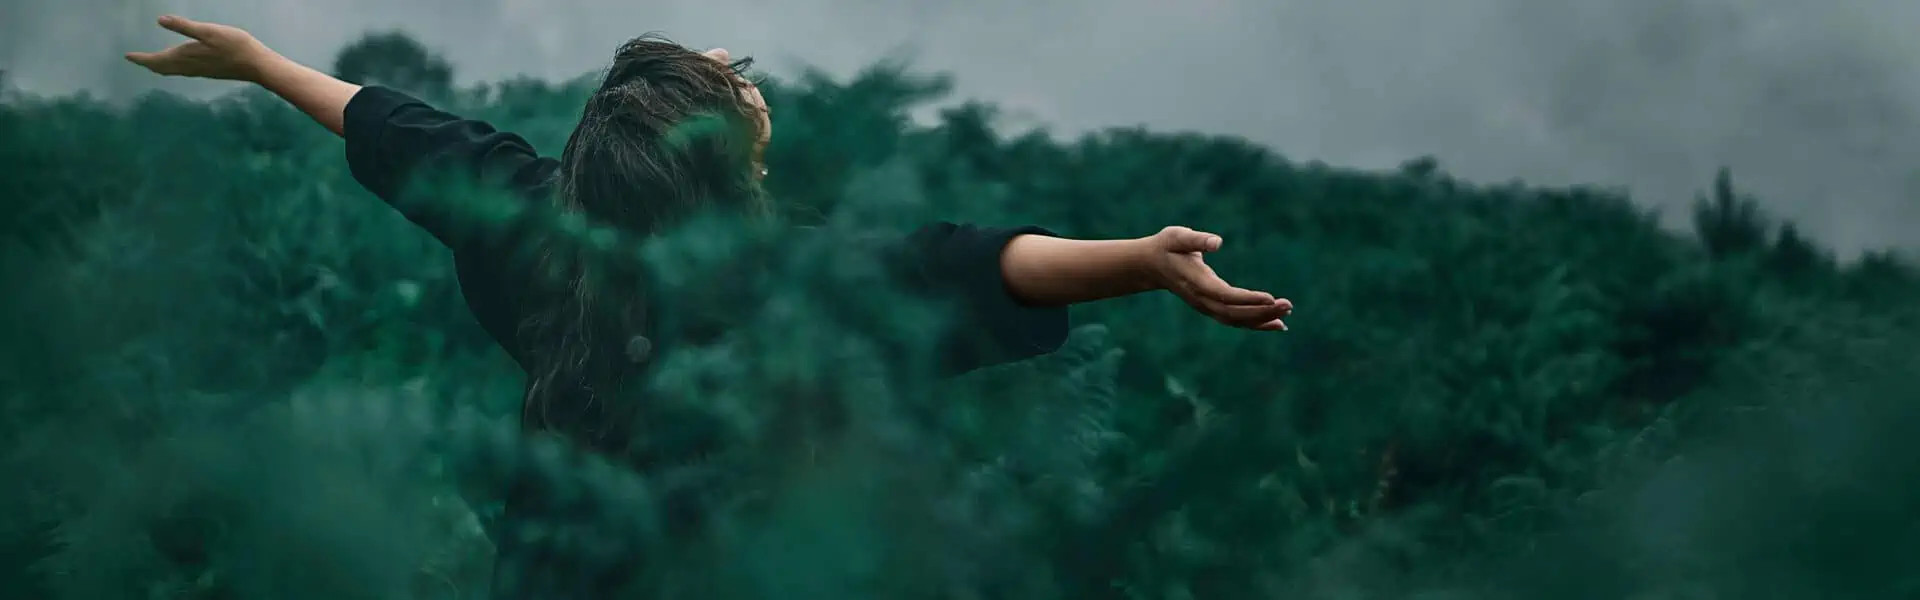 A woman stands with her arms outstretched and her face turned towards the sky in a sea of green ferns.